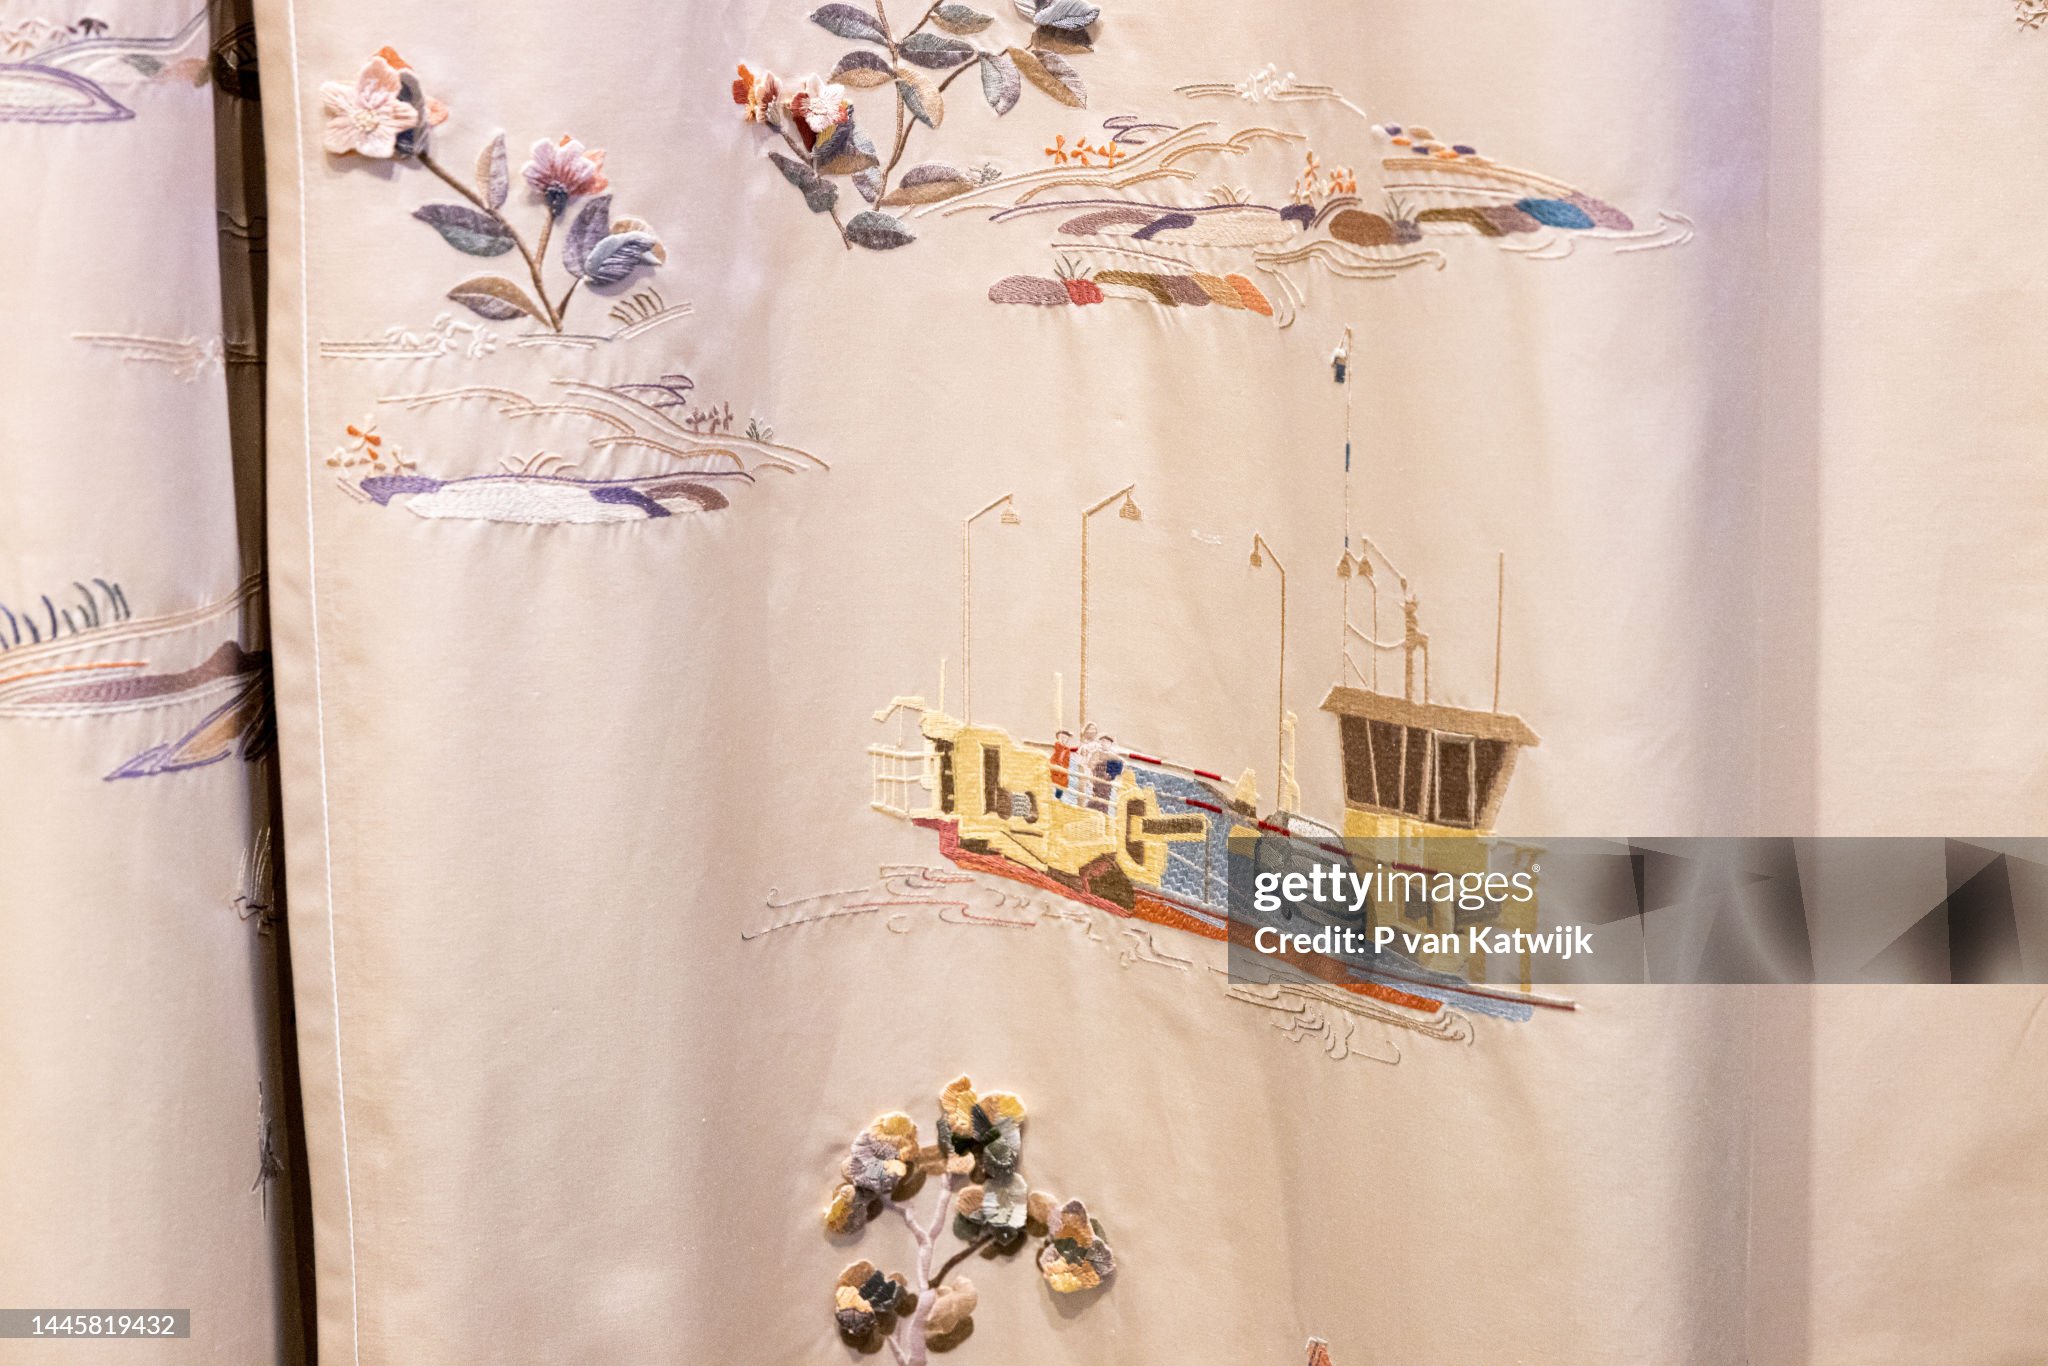 queen-maxima-of-the-netherlands-visits-textile-museum-to-present-her-new-curtains-for-palace.jpg?s=2048x2048&w=gi&k=20&c=4MedCFYi1paGkA7FXR1bVr4U3nOVVUBx7RijGUAHRrc=